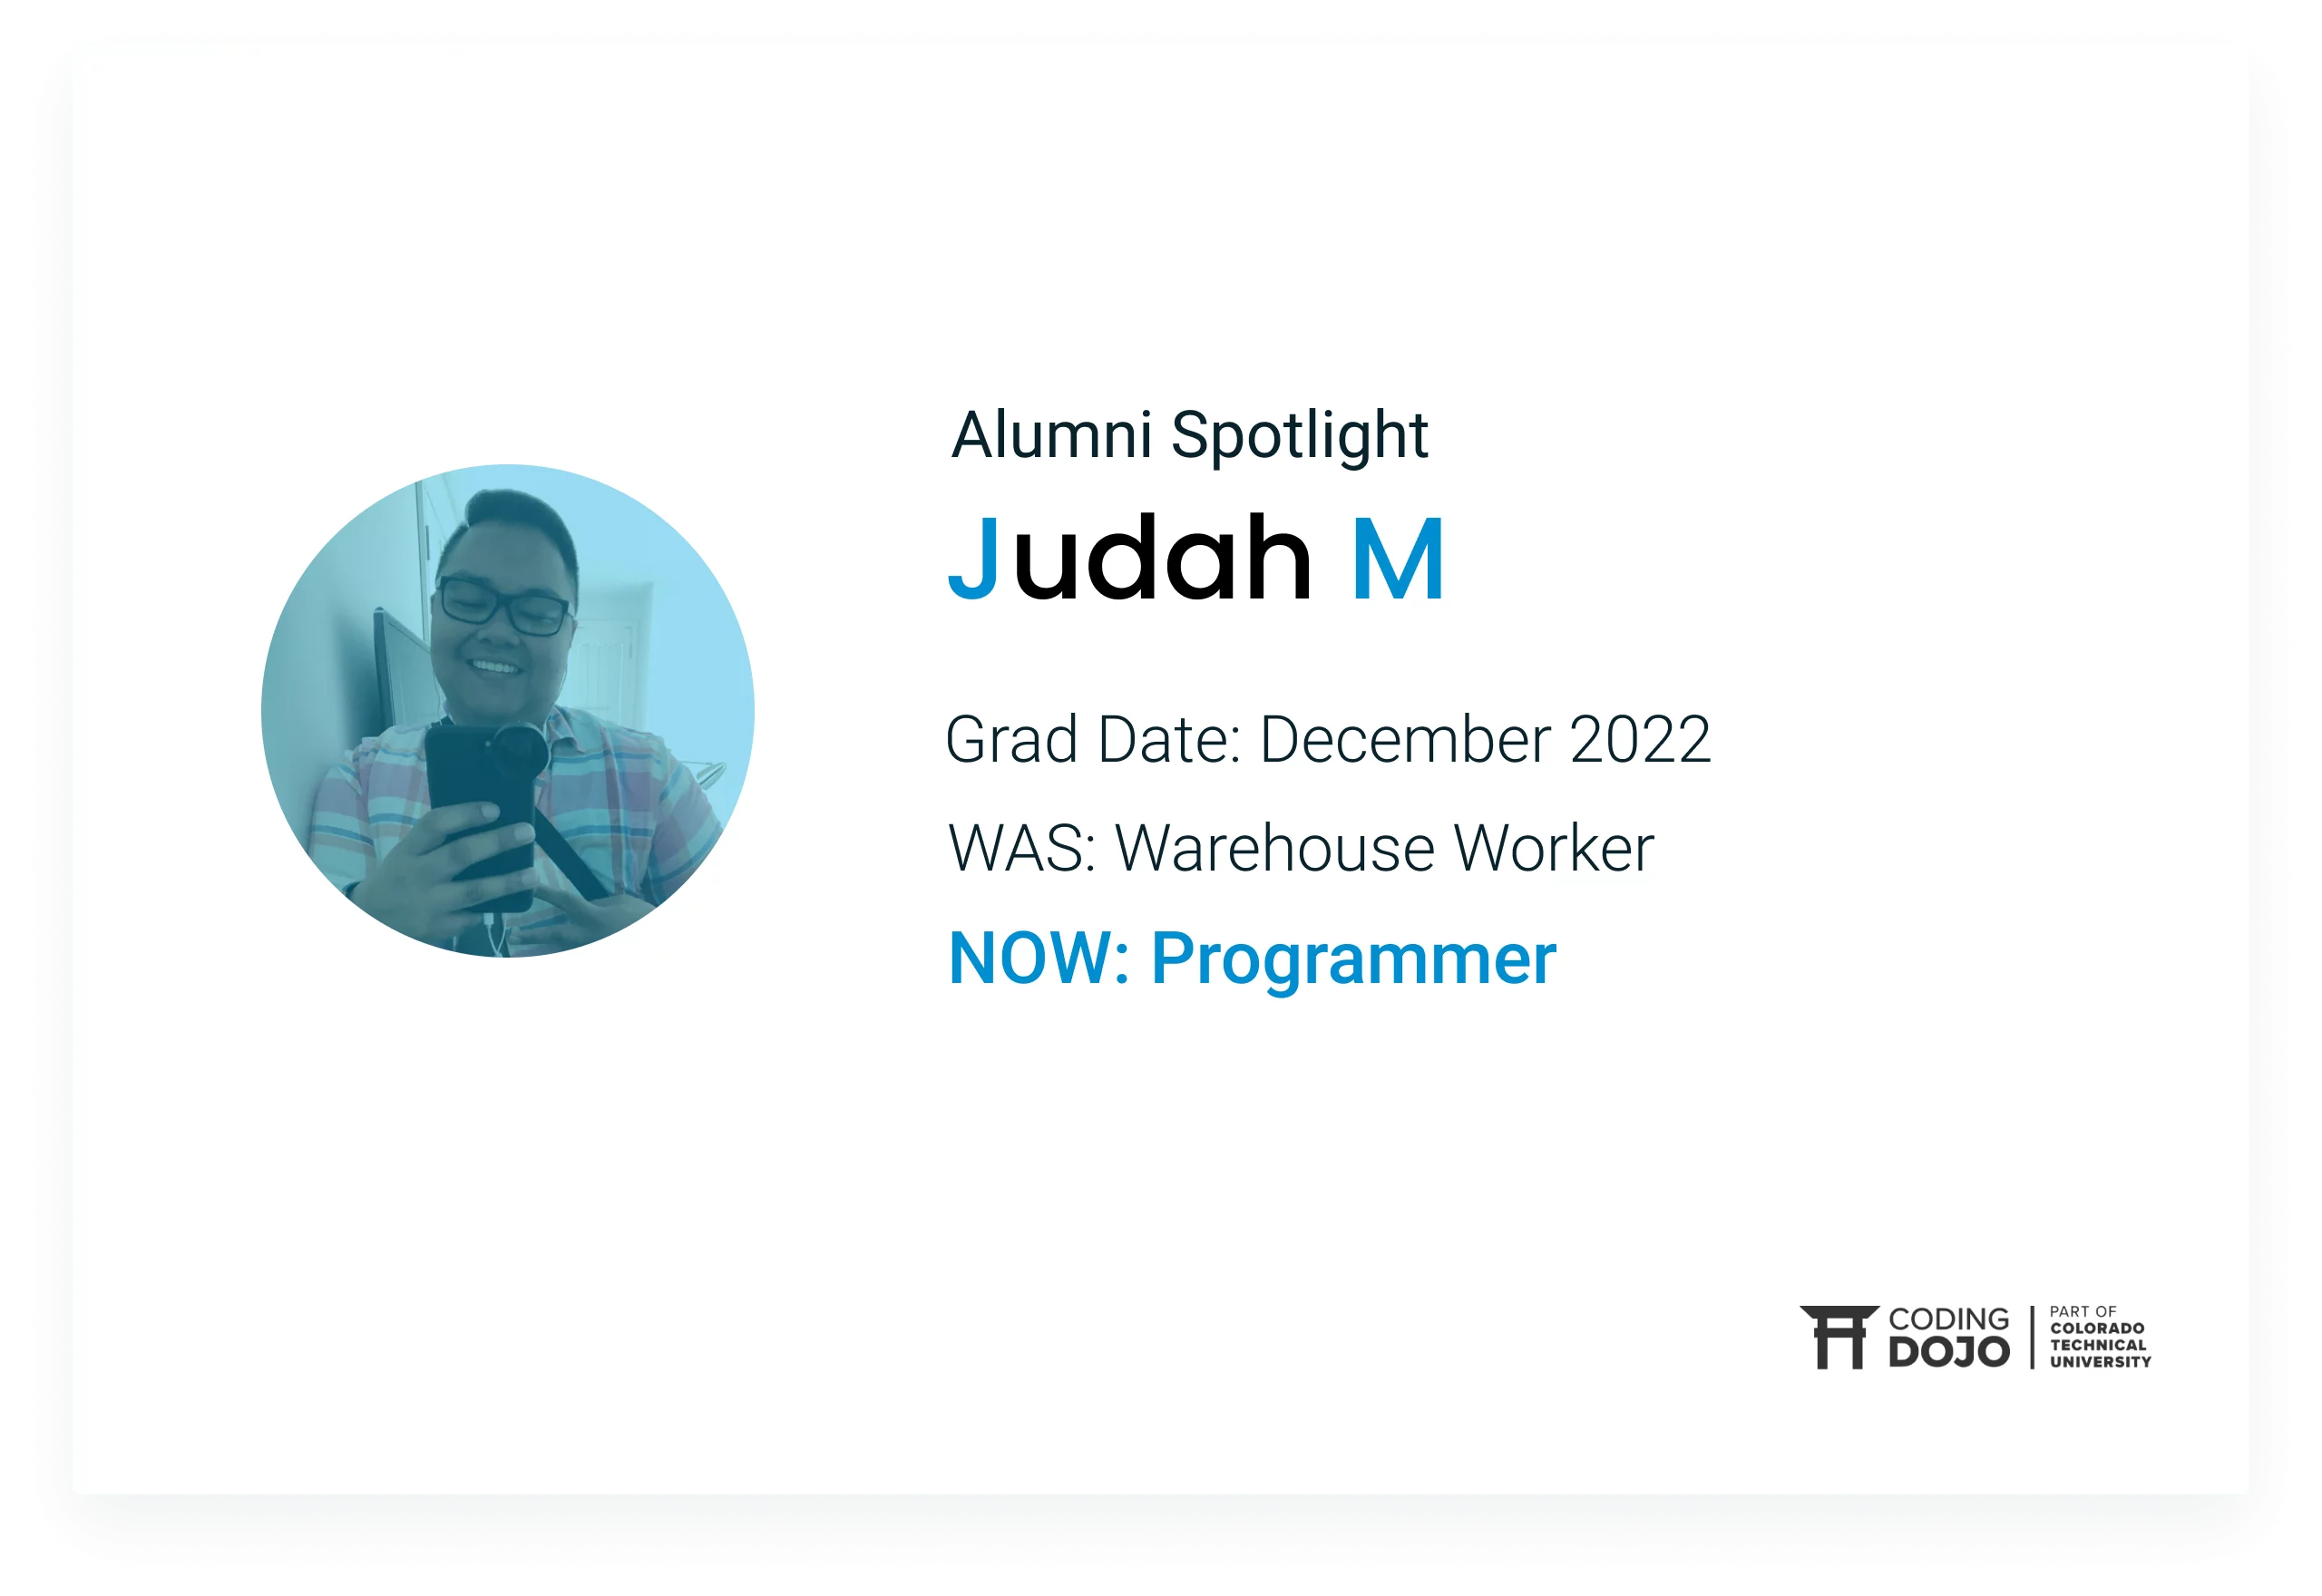 From Packing Packages to Programmer | How Judah M Accelerated His Career Path Into Tech